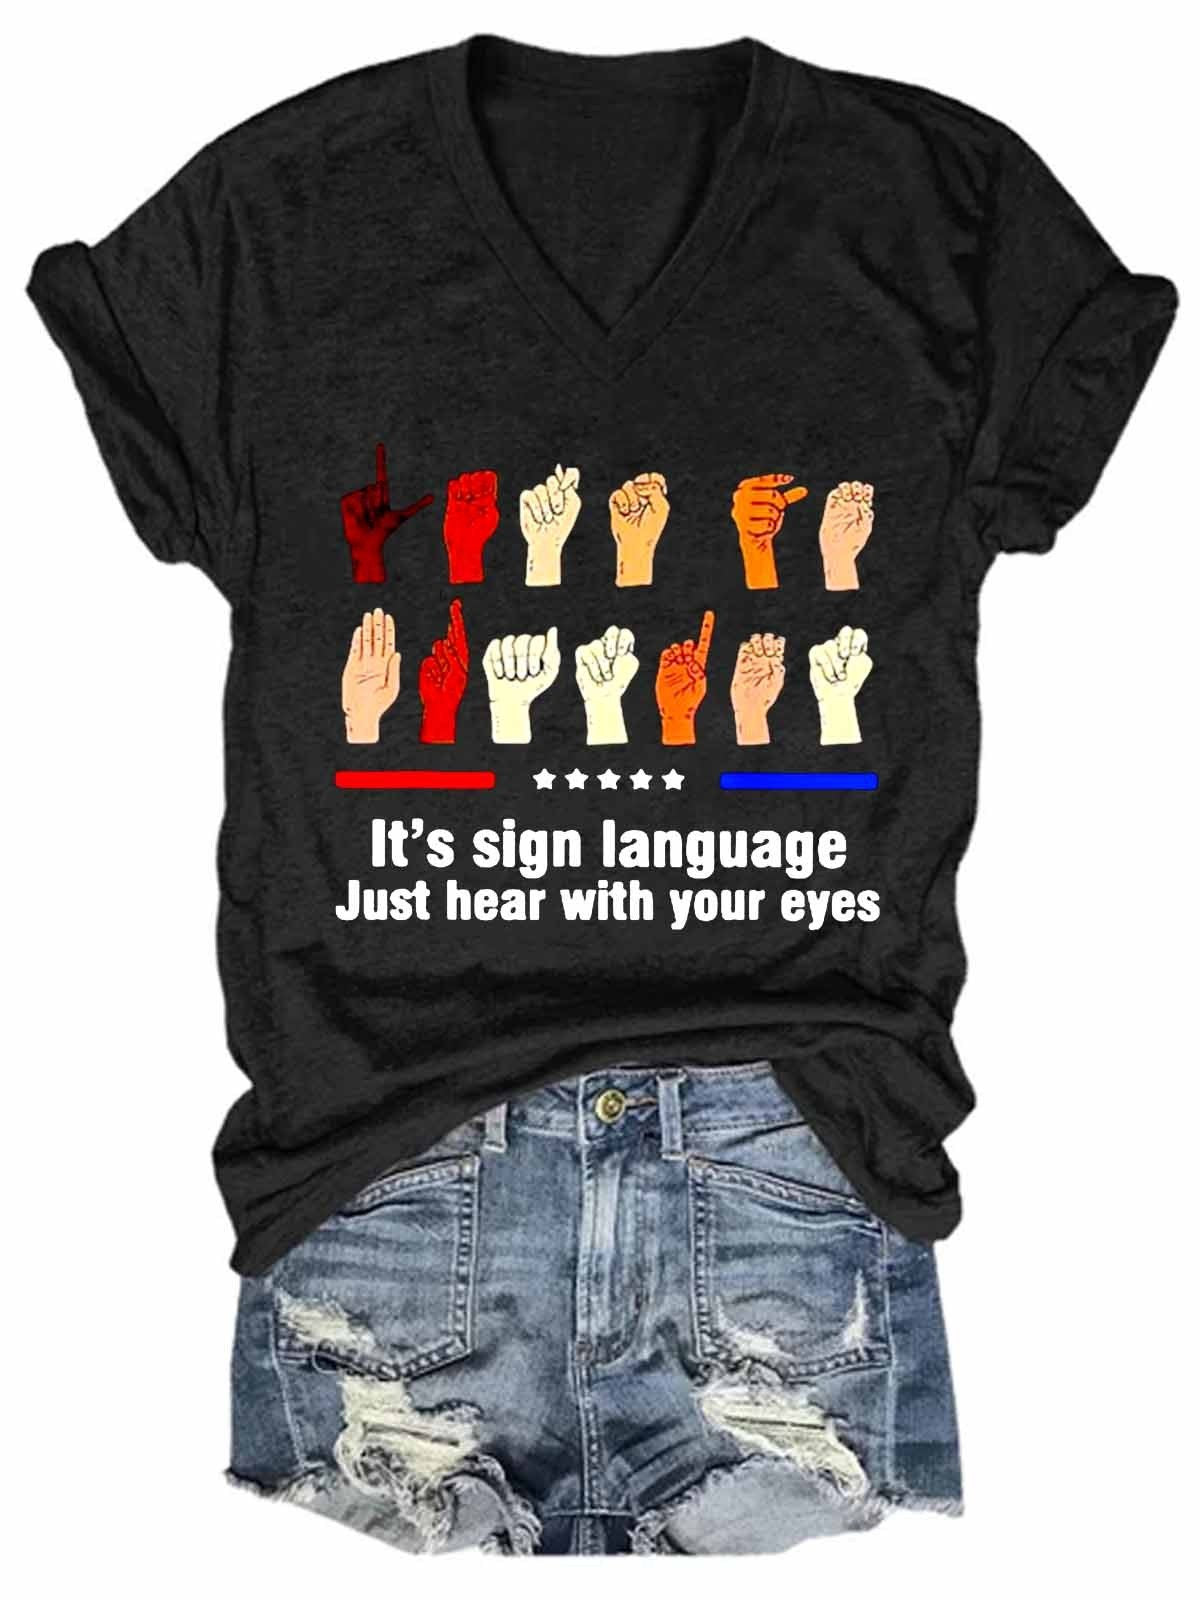 Women's Funny Hands It’s Sign Language Just Hear With Your Eyes V-Neck T-Shirt - Outlets Forever